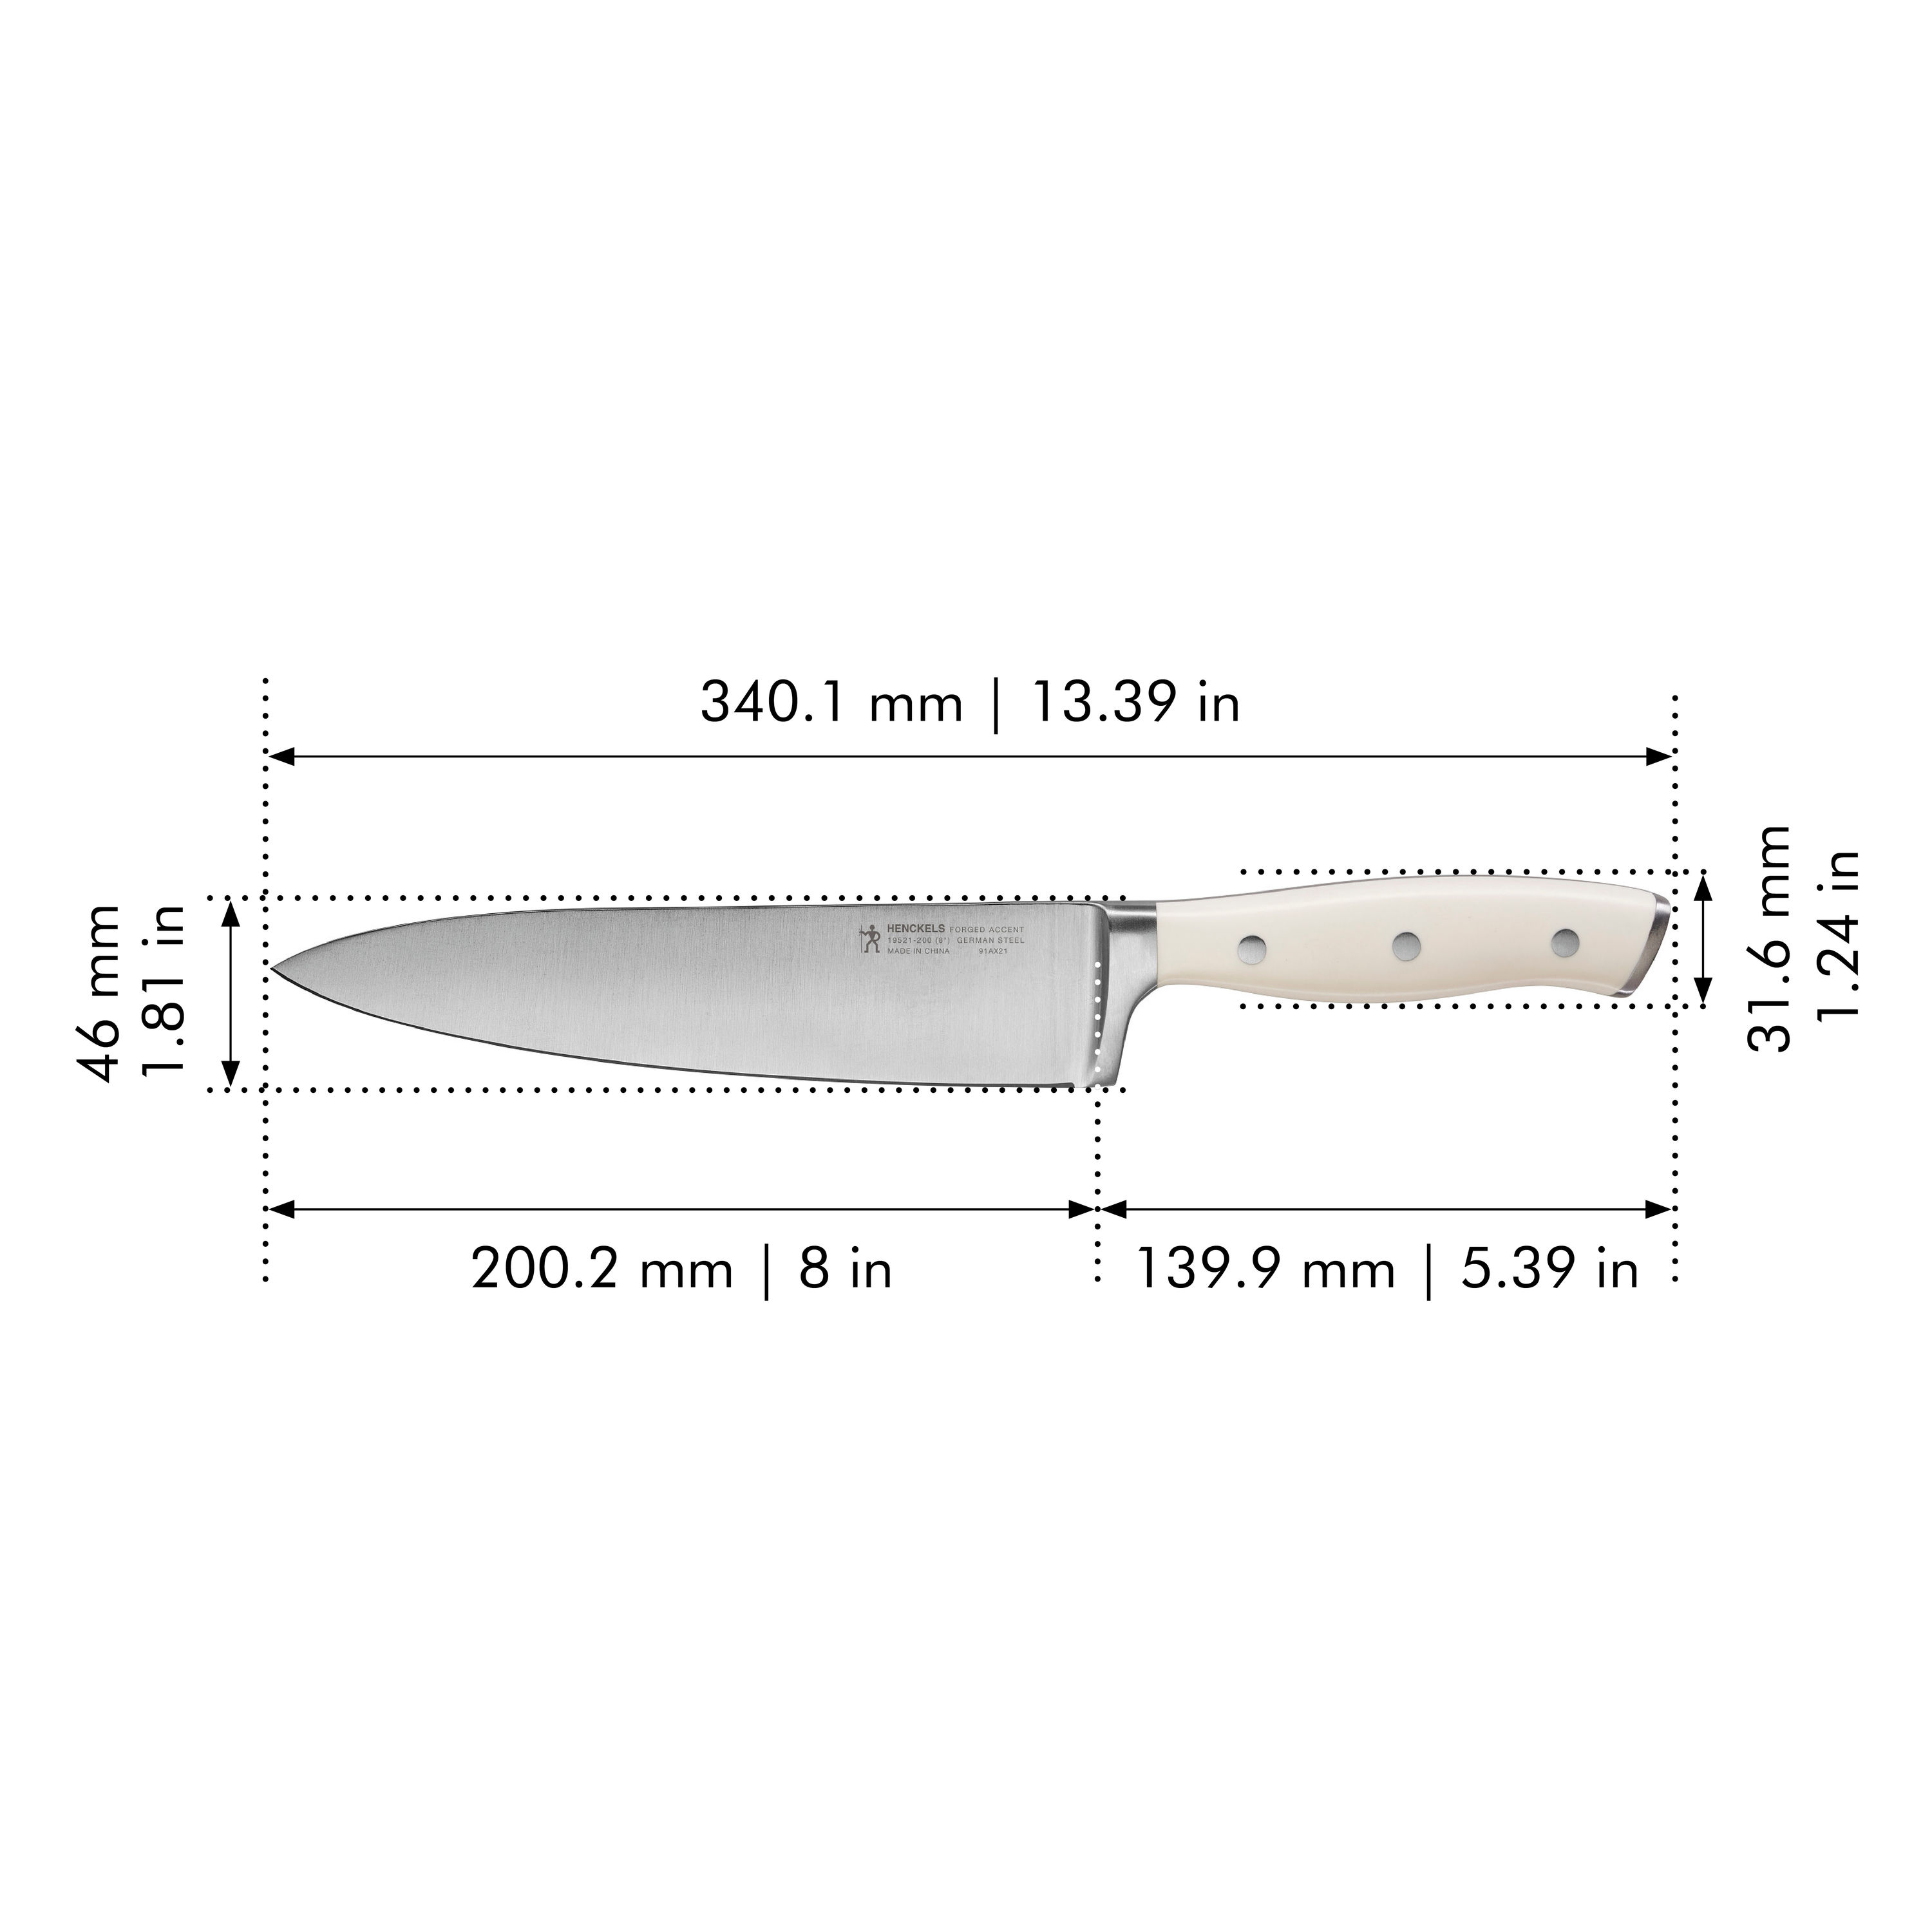 Henckels Forged Synergy 8-inch Chef's Knife, 8-inch - QFC